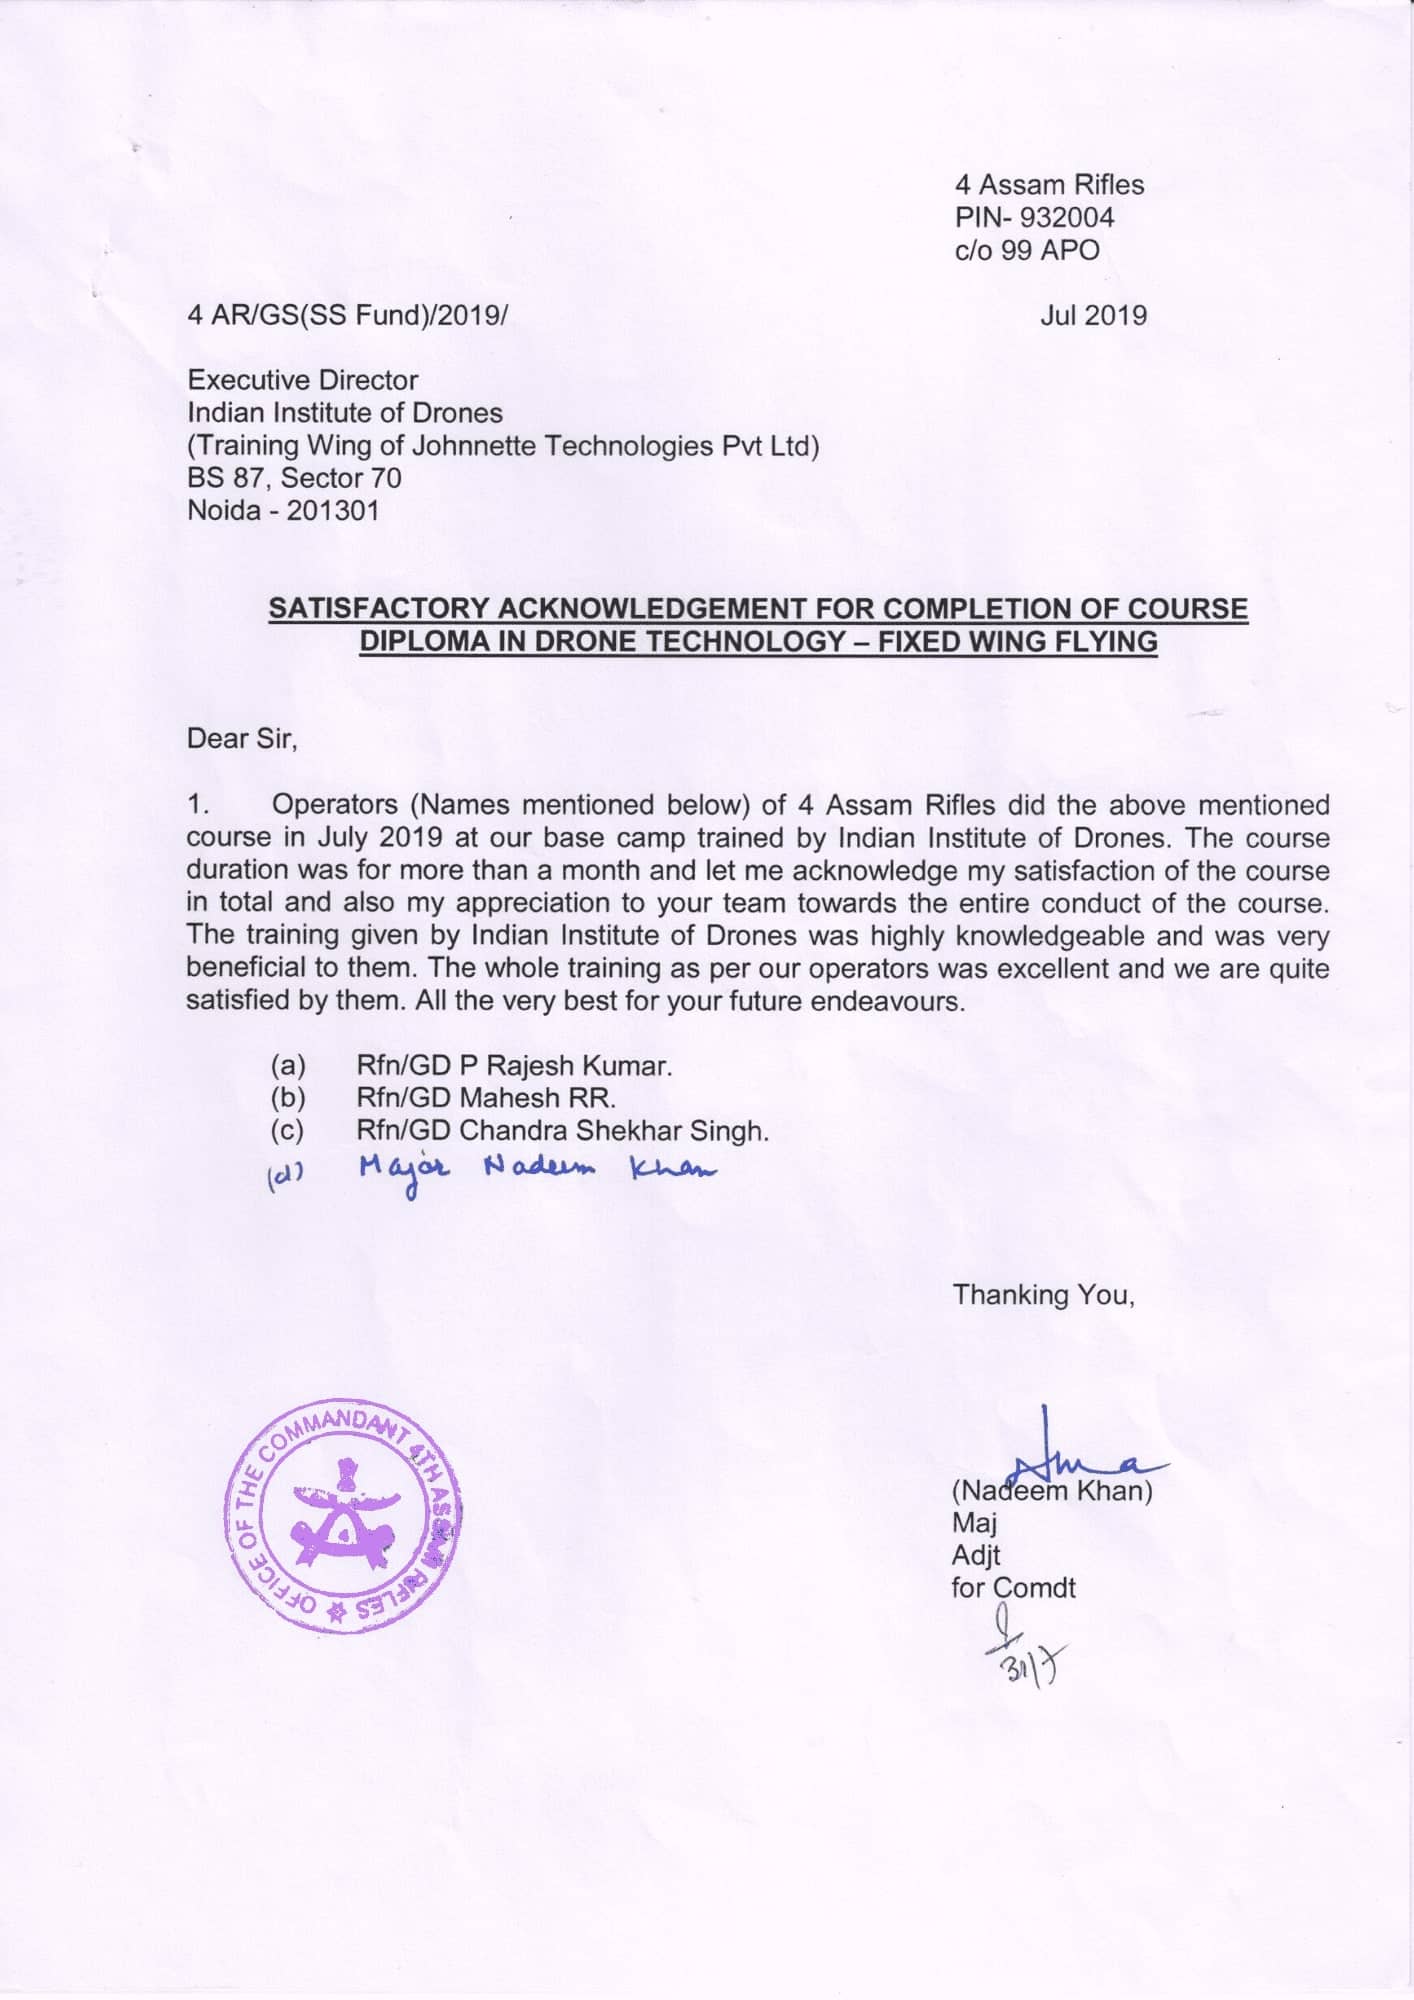 Satisfactory Letter for Drone Training Received from Assam Rifles